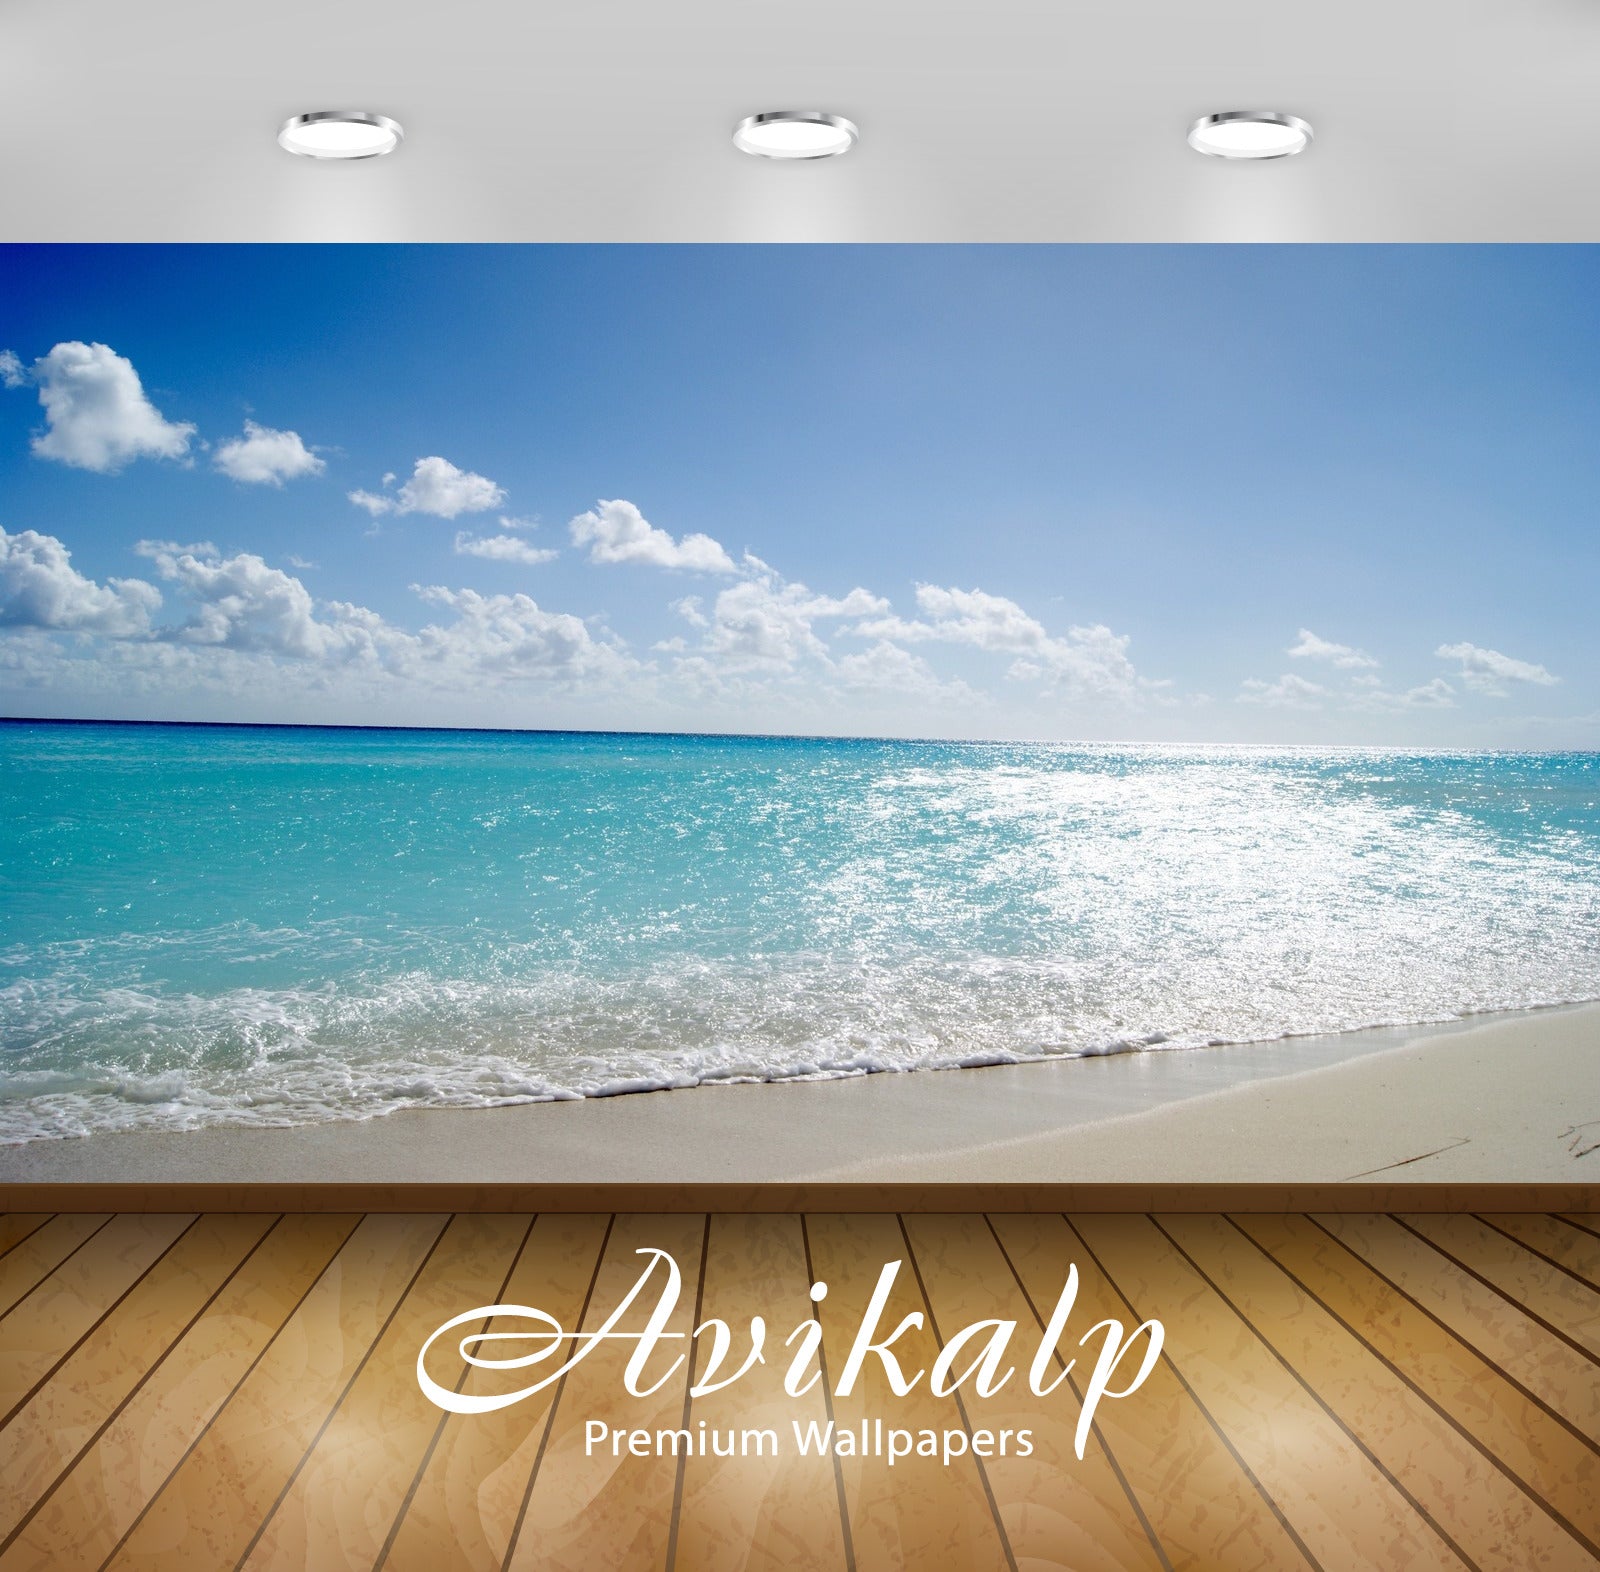 Avikalp Exclusive Beach AWI1080 HD Wallpapers for Living room, Hall, Kids Room, Kitchen, TV Backgrou